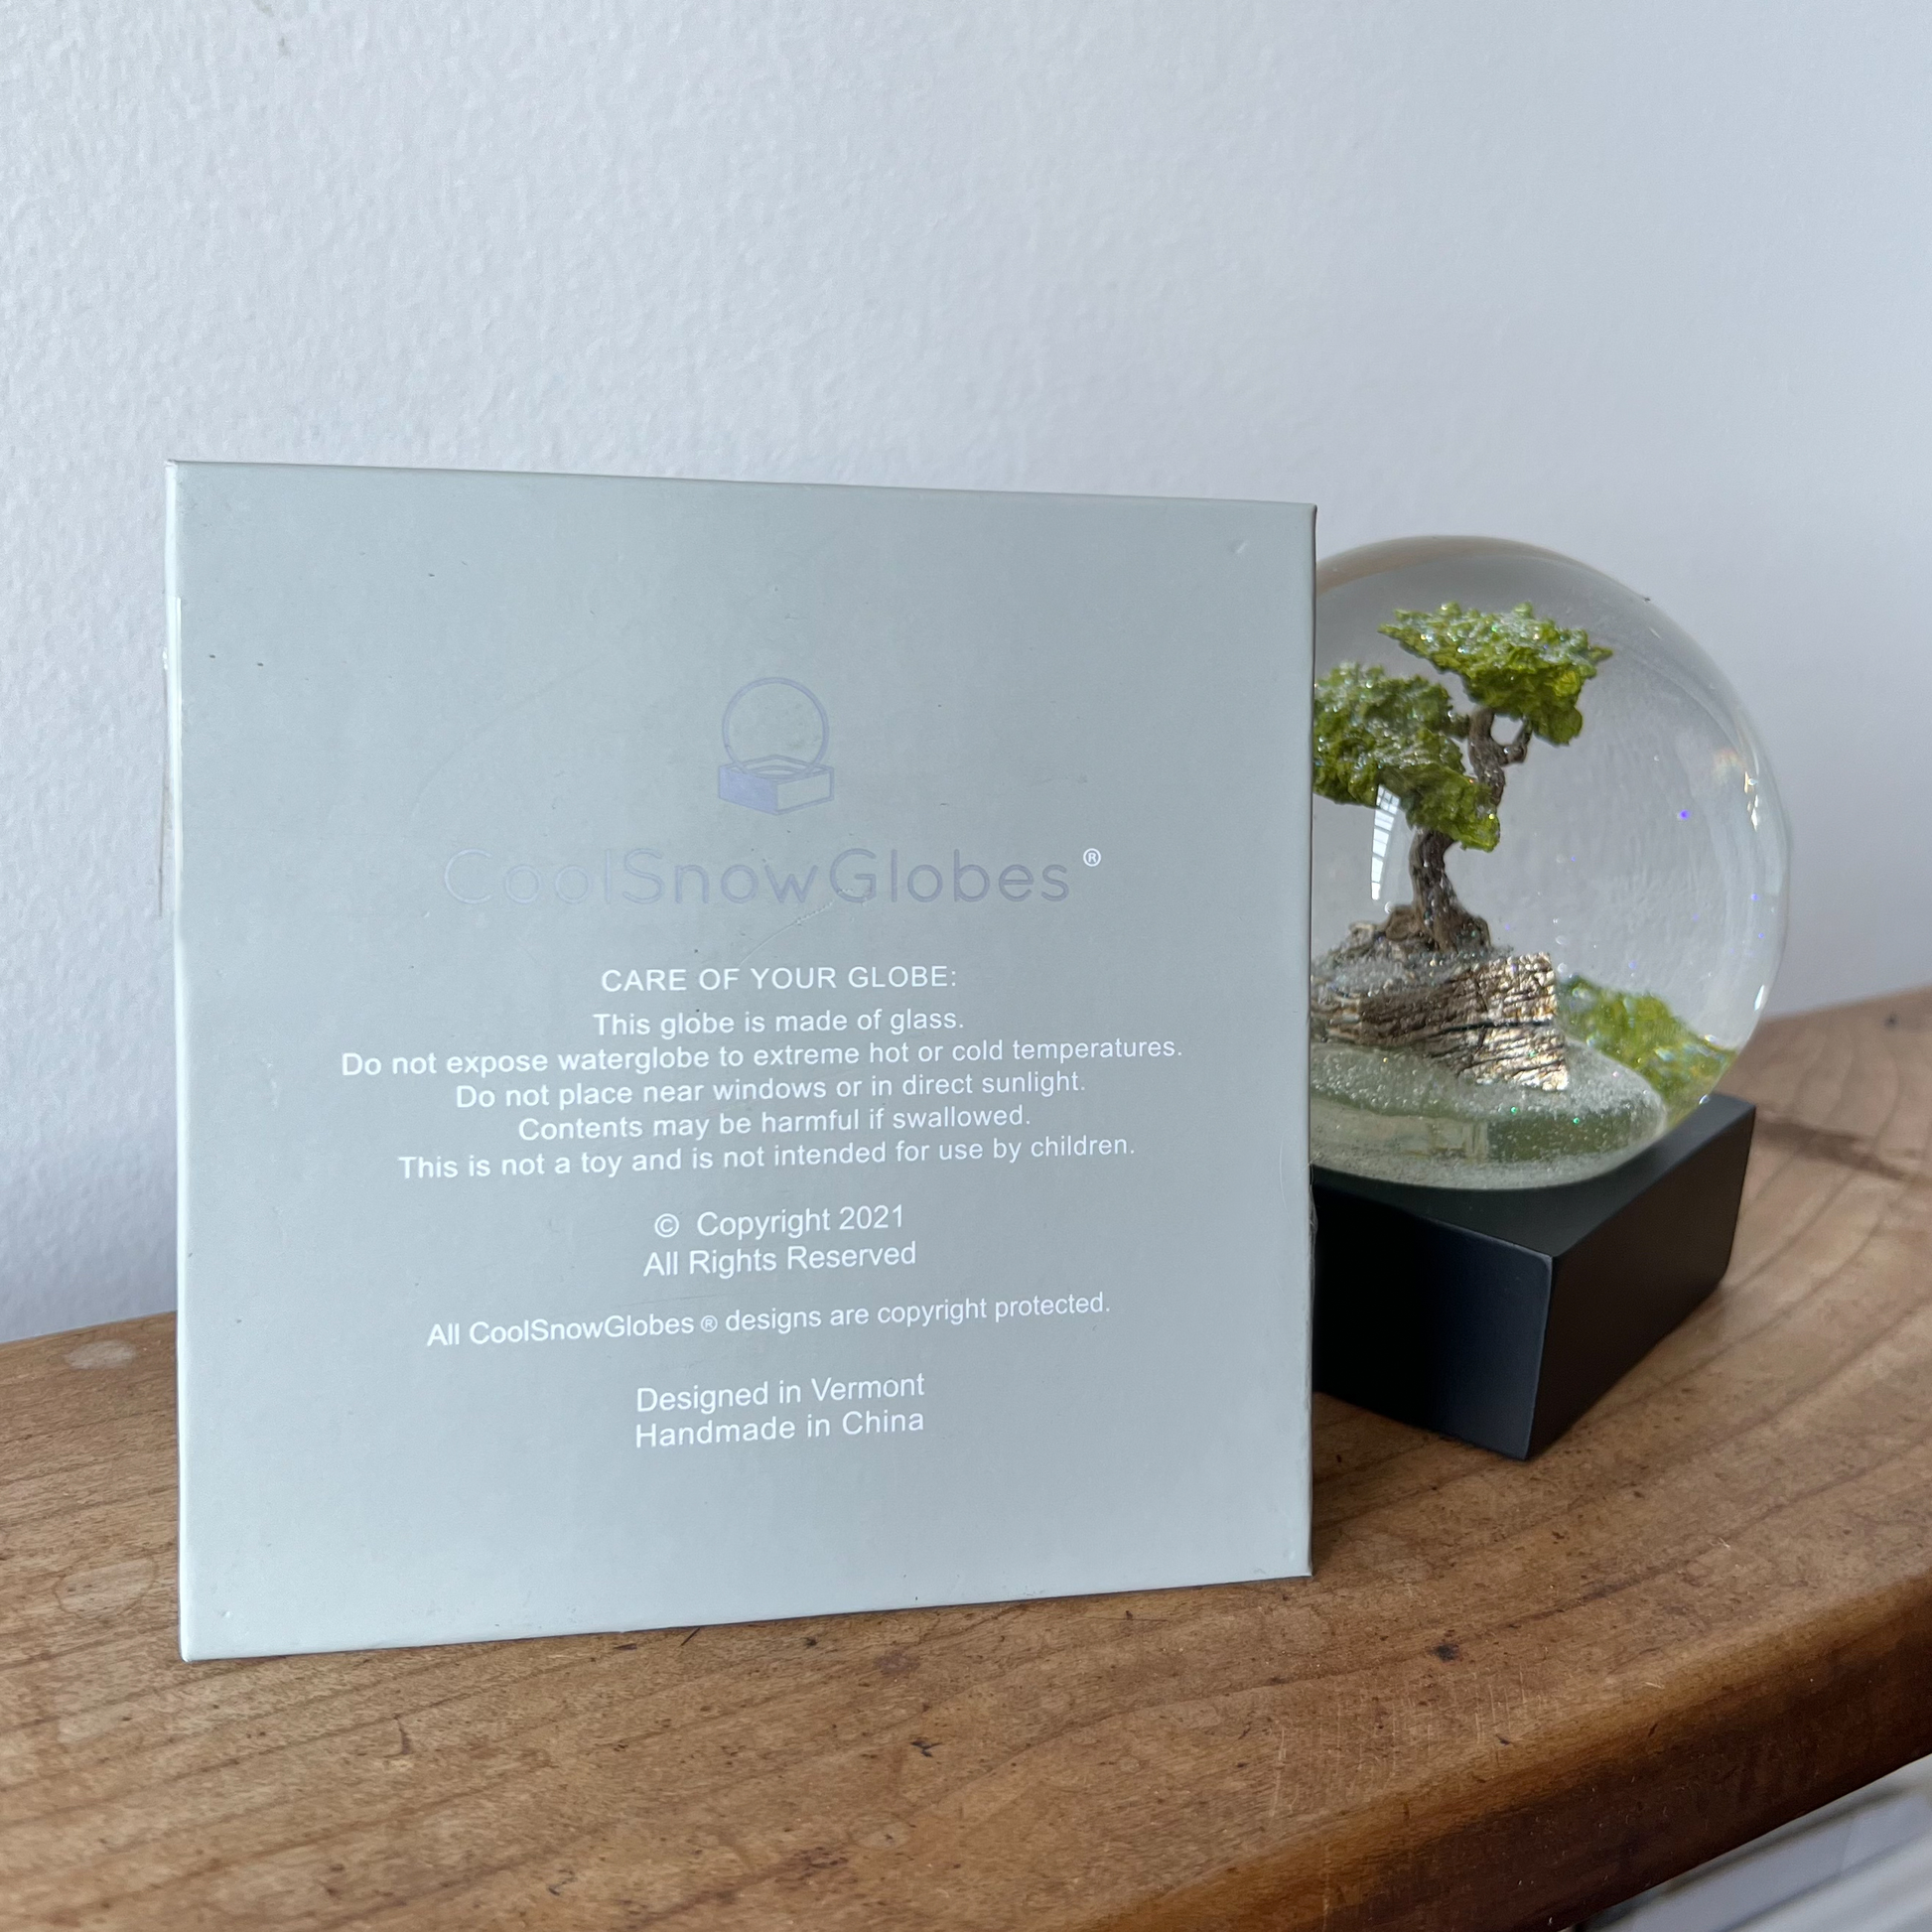 Bonsai tree snow globe on wooden ledge next to box showing care instructions and brand